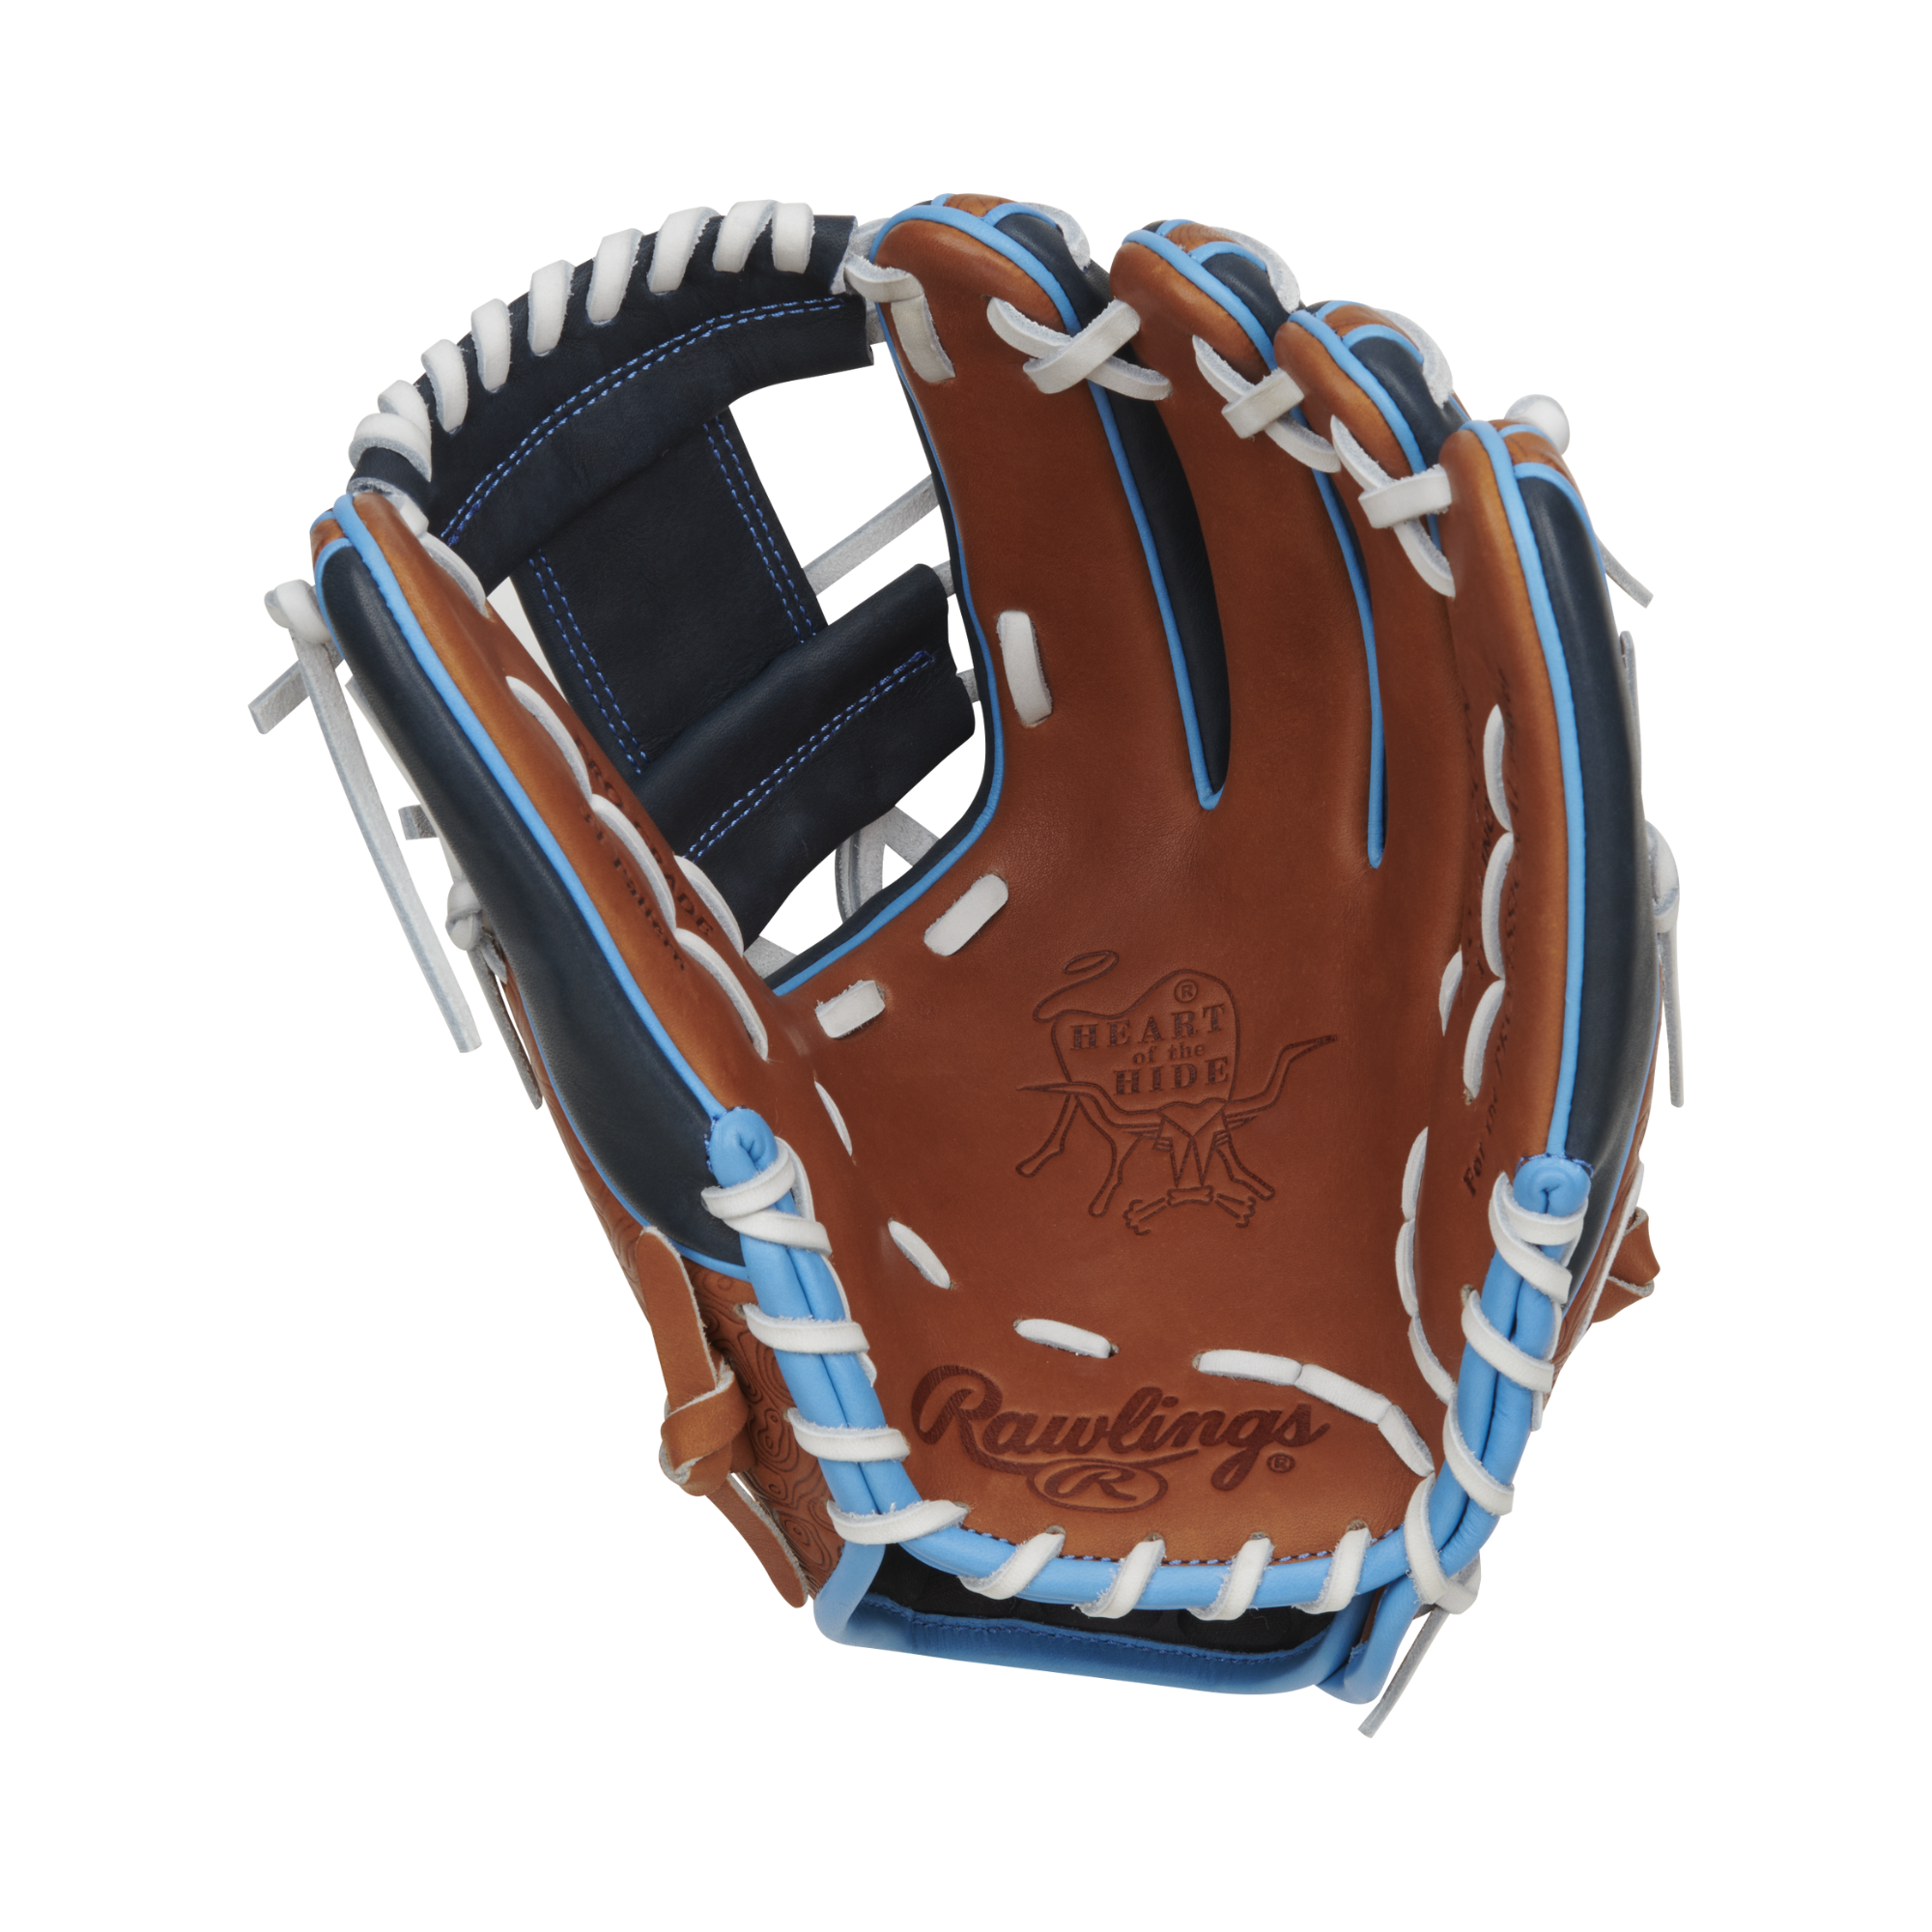 Rawlings Heart Of the Hide Color Sync 8.0 Baseball Glove RPRO315-2GBN 11.75" RHT